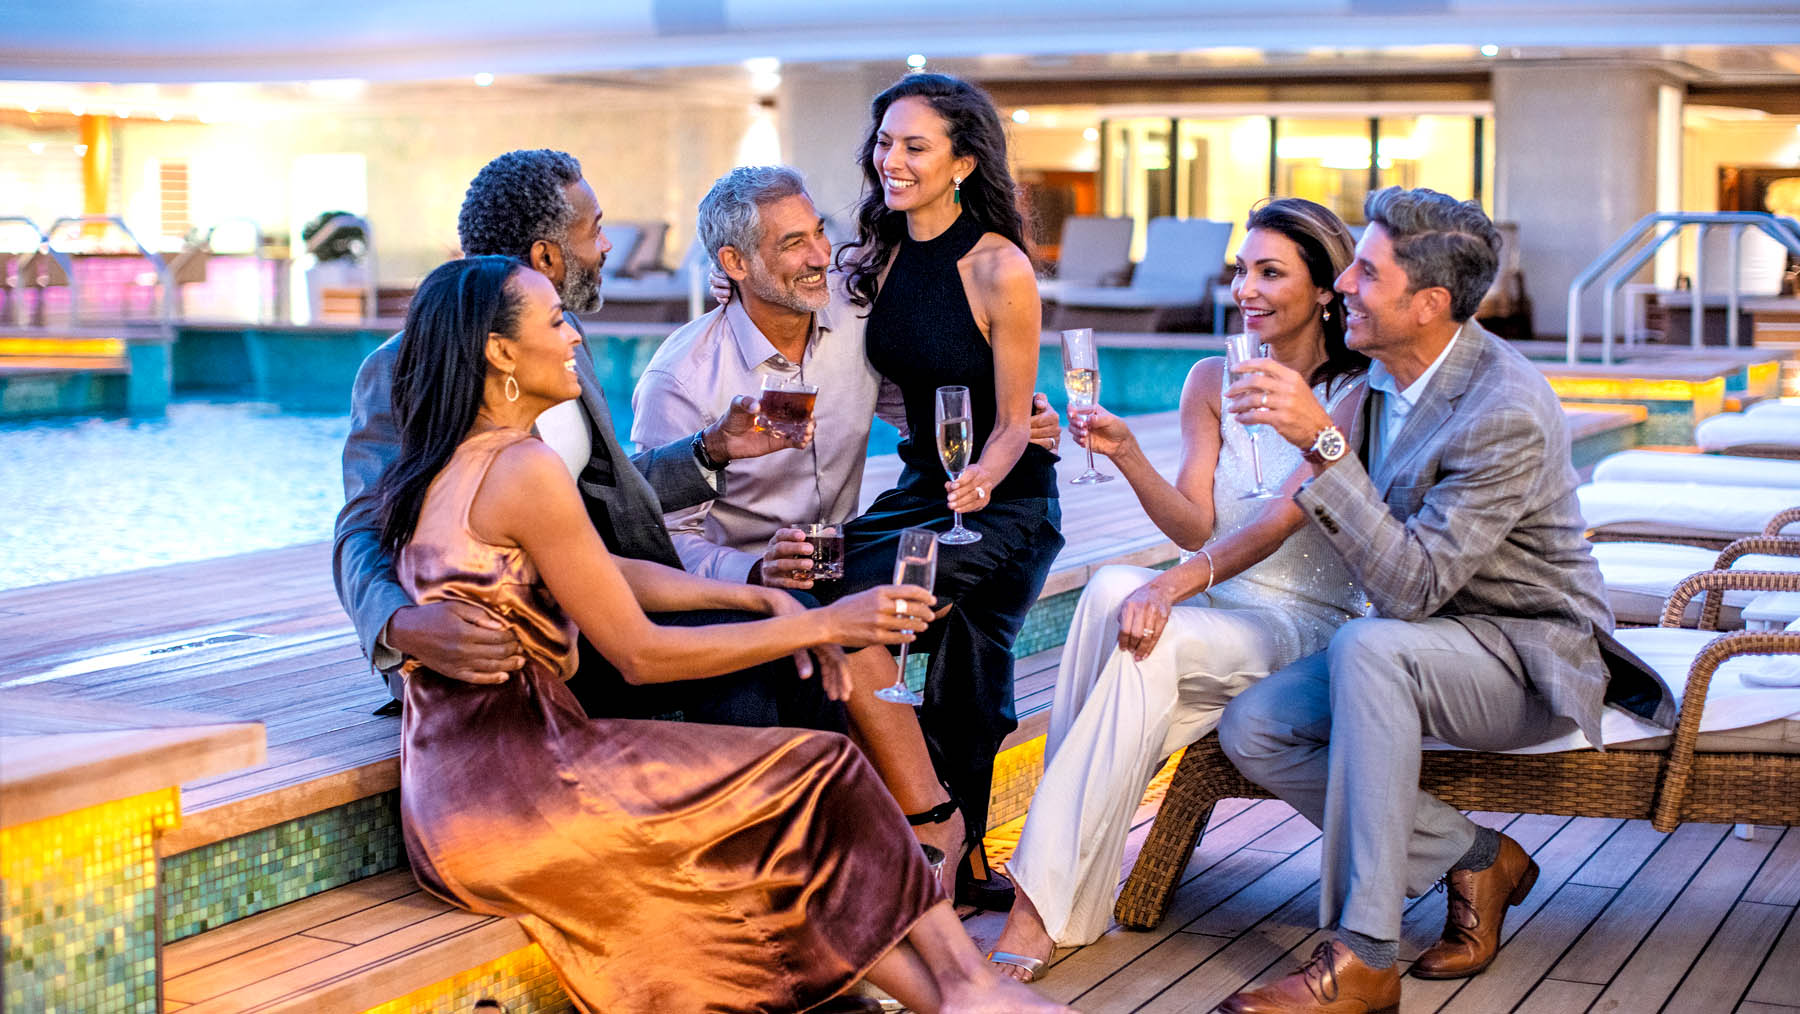 Silversea as one of the best cruise lines for adults